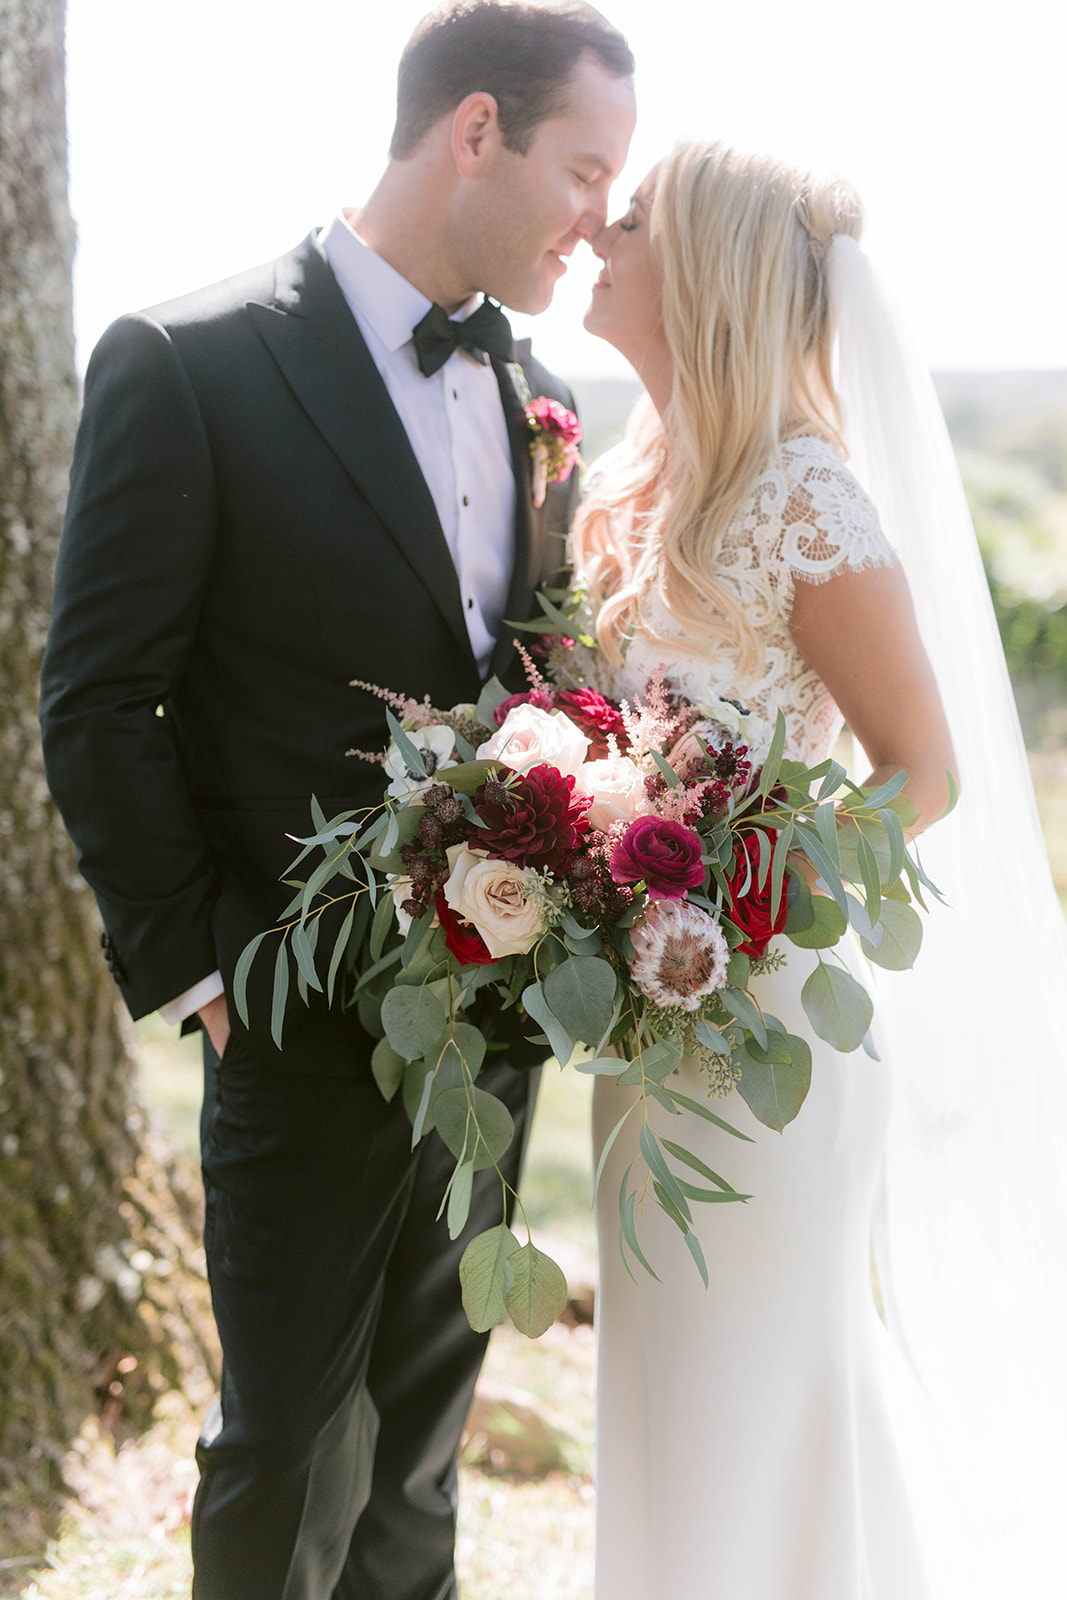 Bride and groom with a garden style bouquet in burgundy and blush